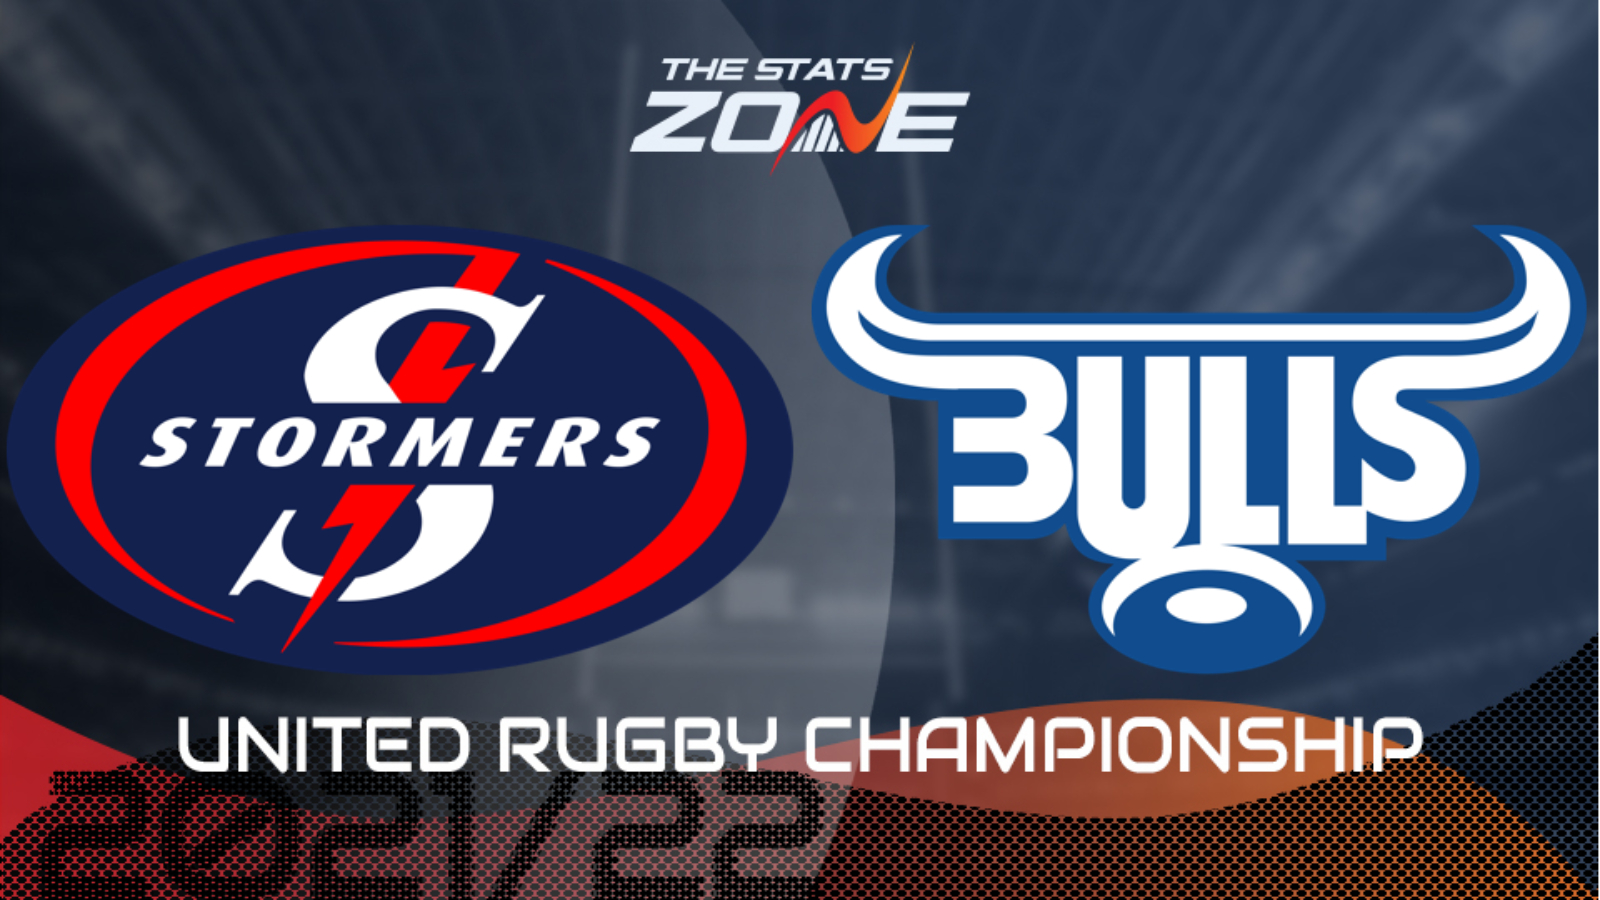 Stormers v Bulls URC Round 10 Review - 2022/23 